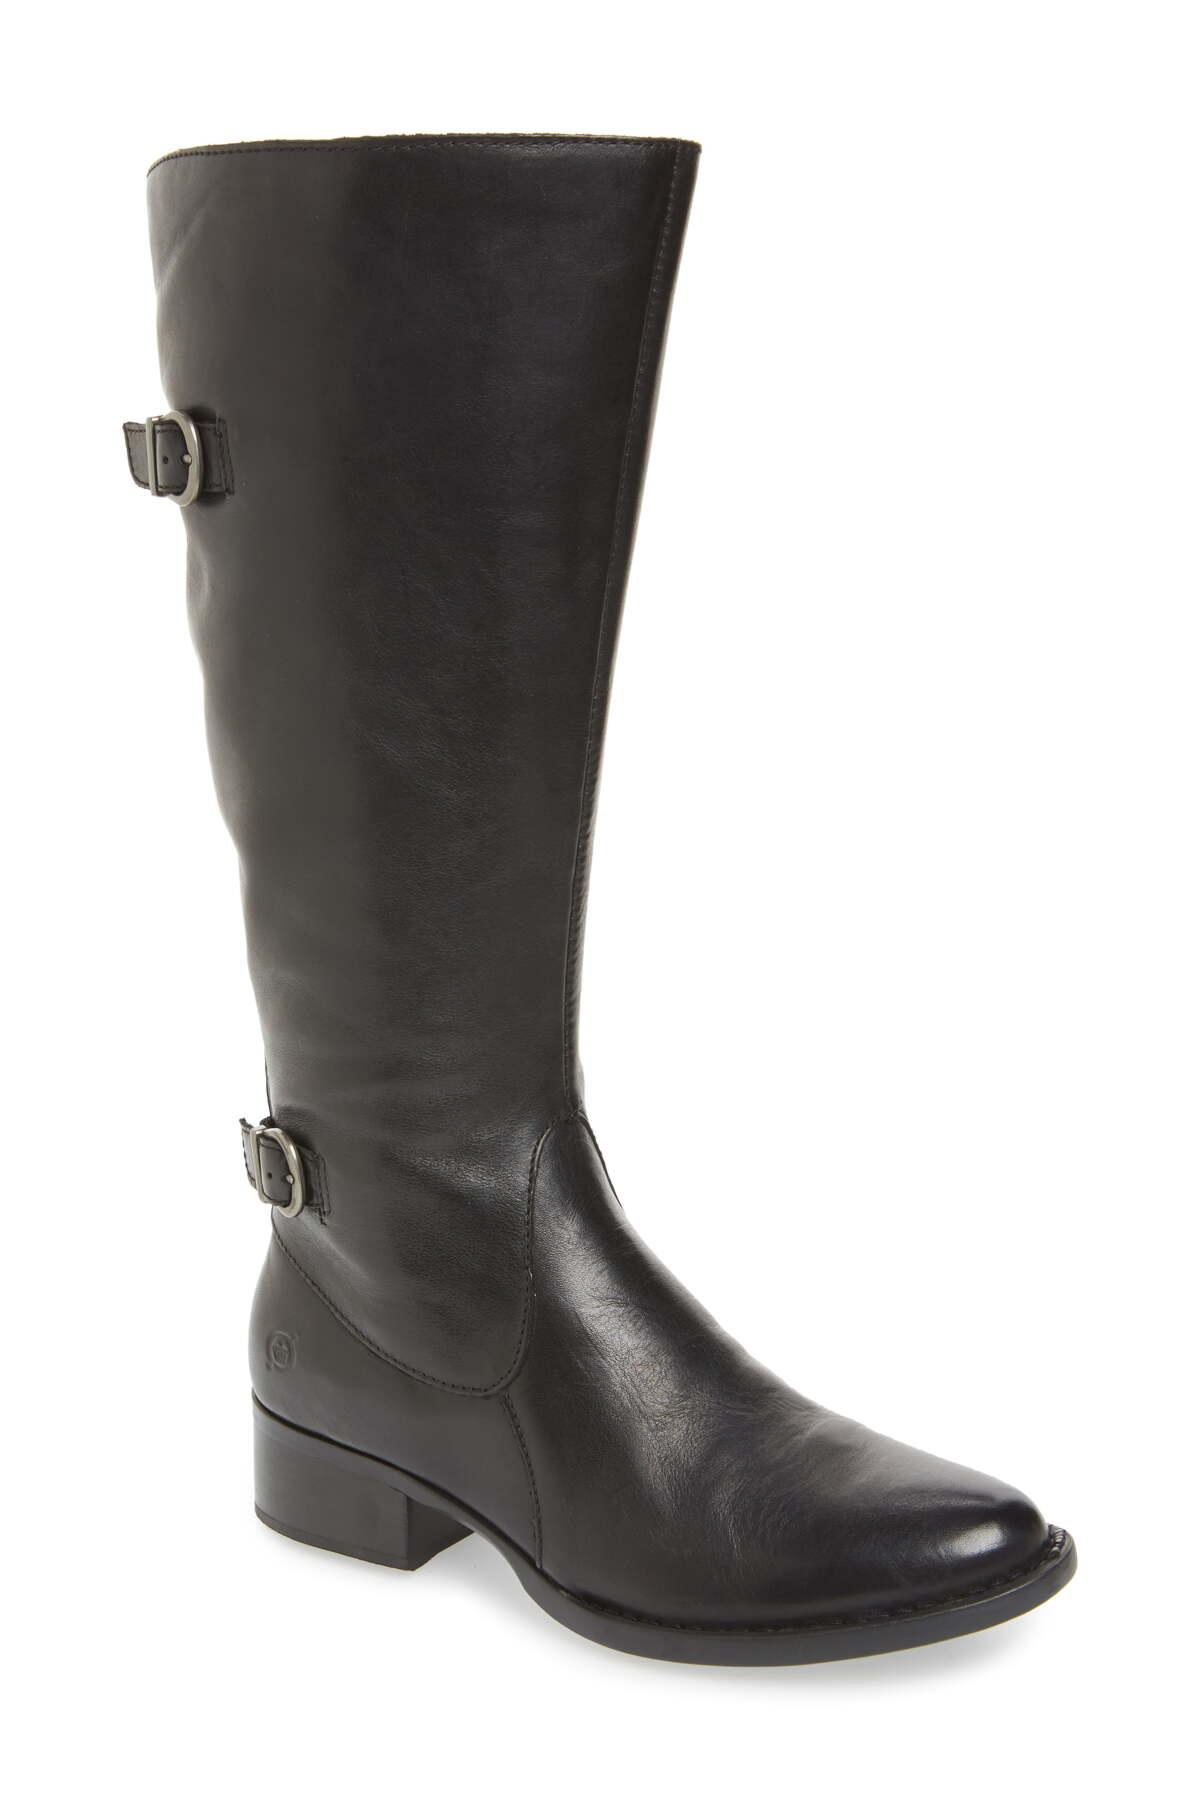 Born Leather Gibb Knee High Riding Boot - Wide Calf in Black - Lyst